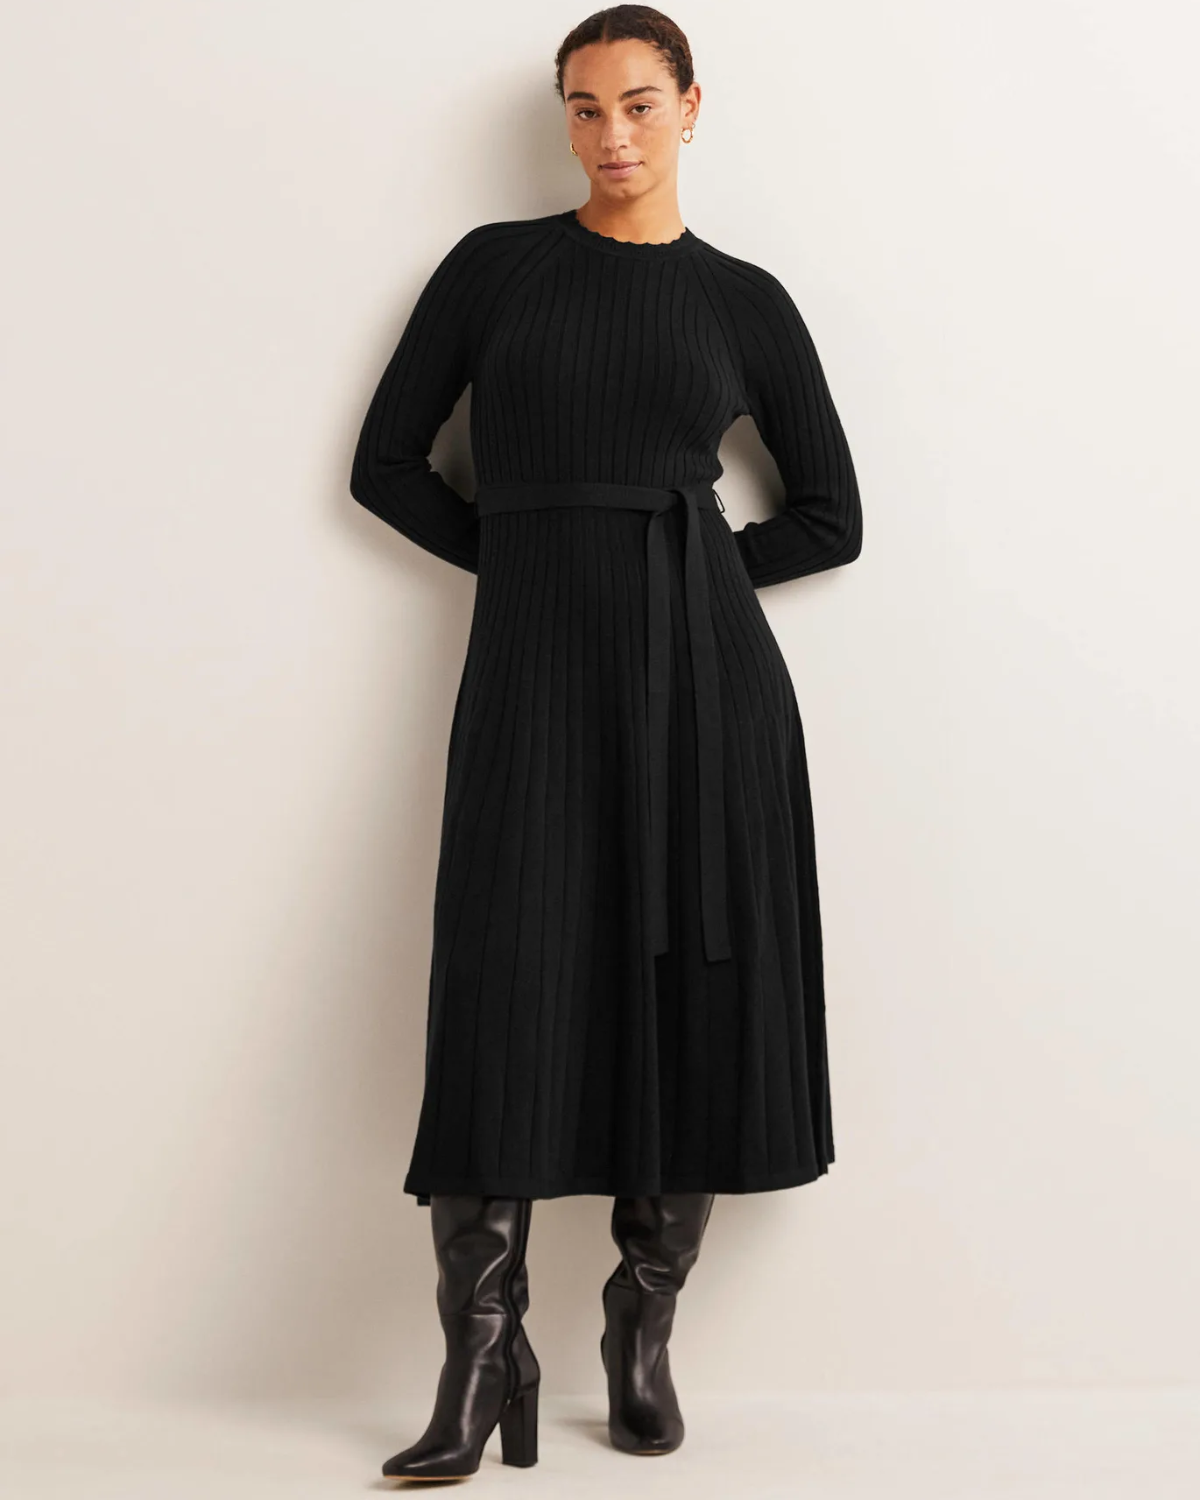 10 Effortless Jumper Dresses To Keep You Warm & Looking Chic This ...